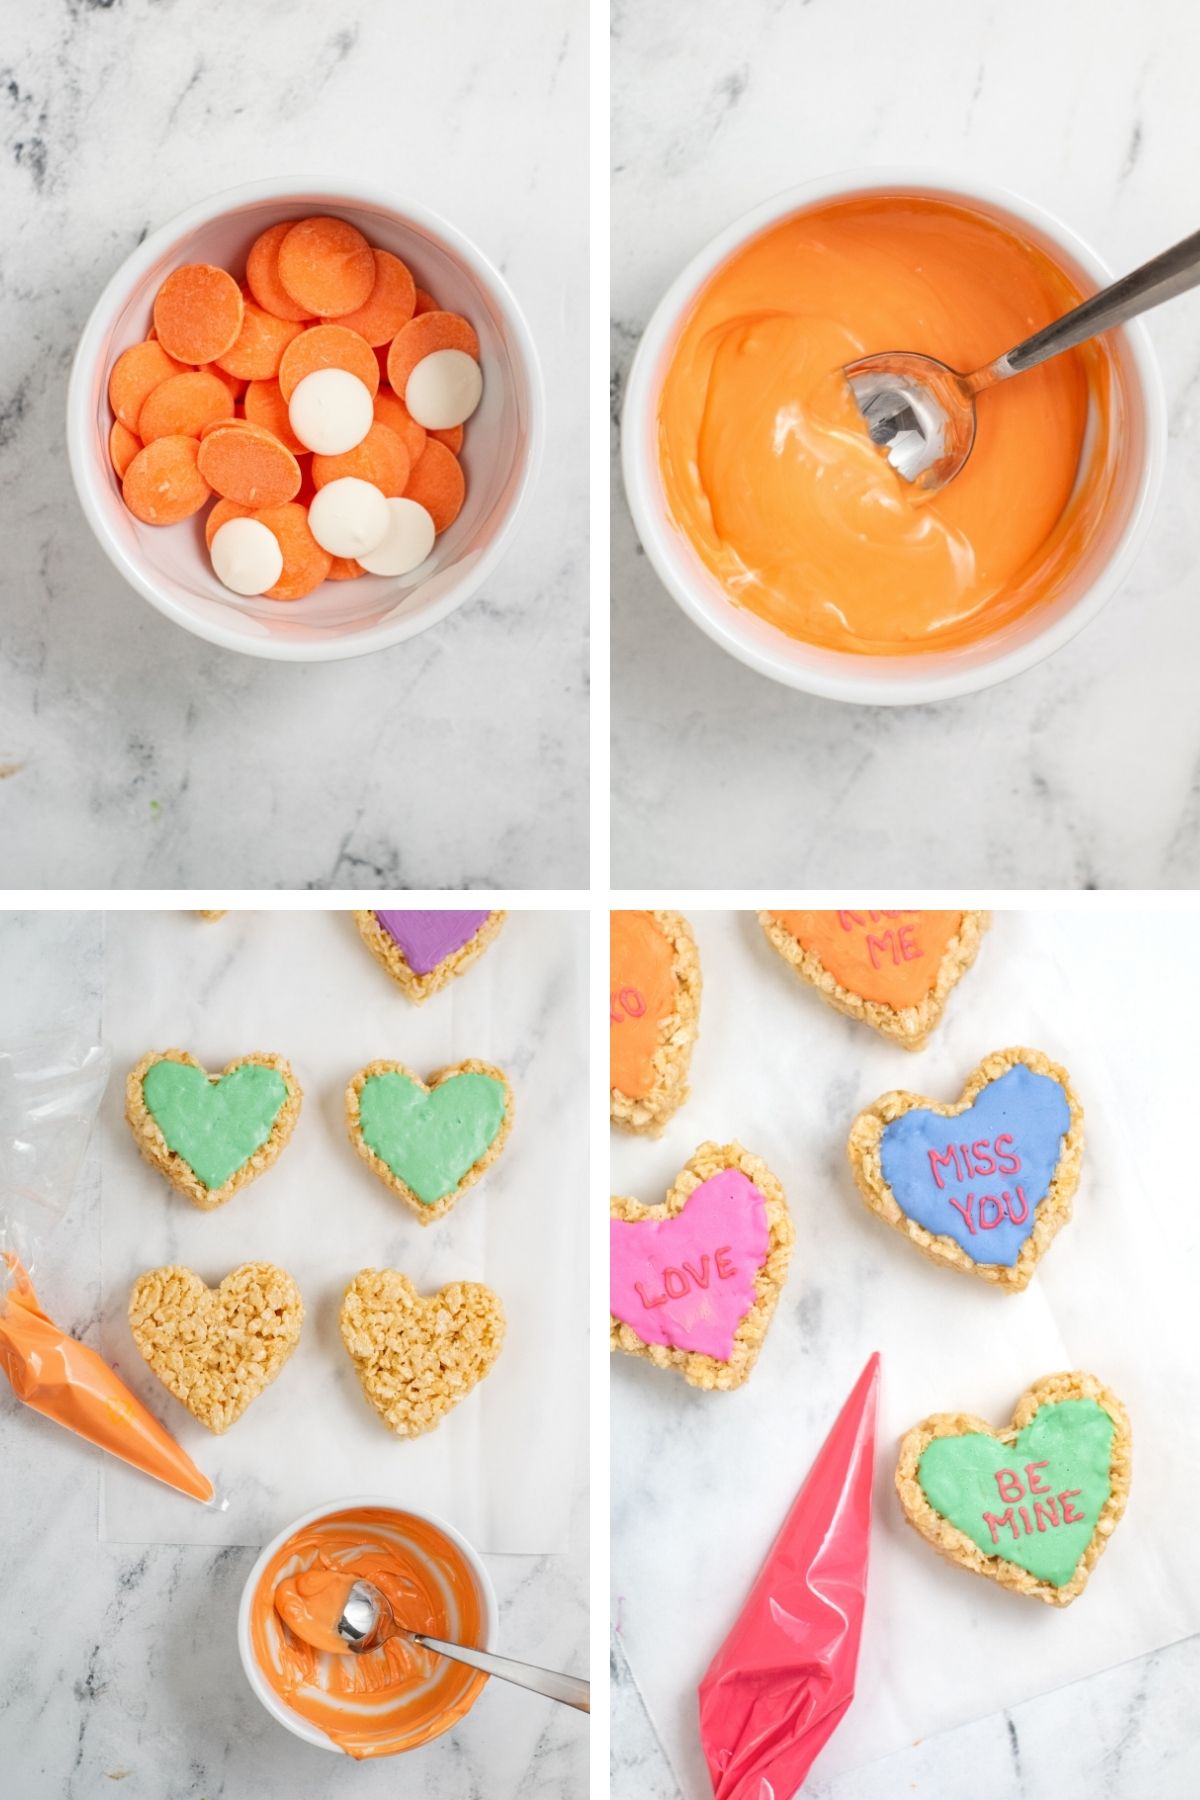 four photos: orange and white candy melts in bowl; melted orange candy melts in bowl; heart krispy treats with a piping bag of orange candy melts; finished heart krispies with different colors and red letters spelling Be Mine, Miss You, Love